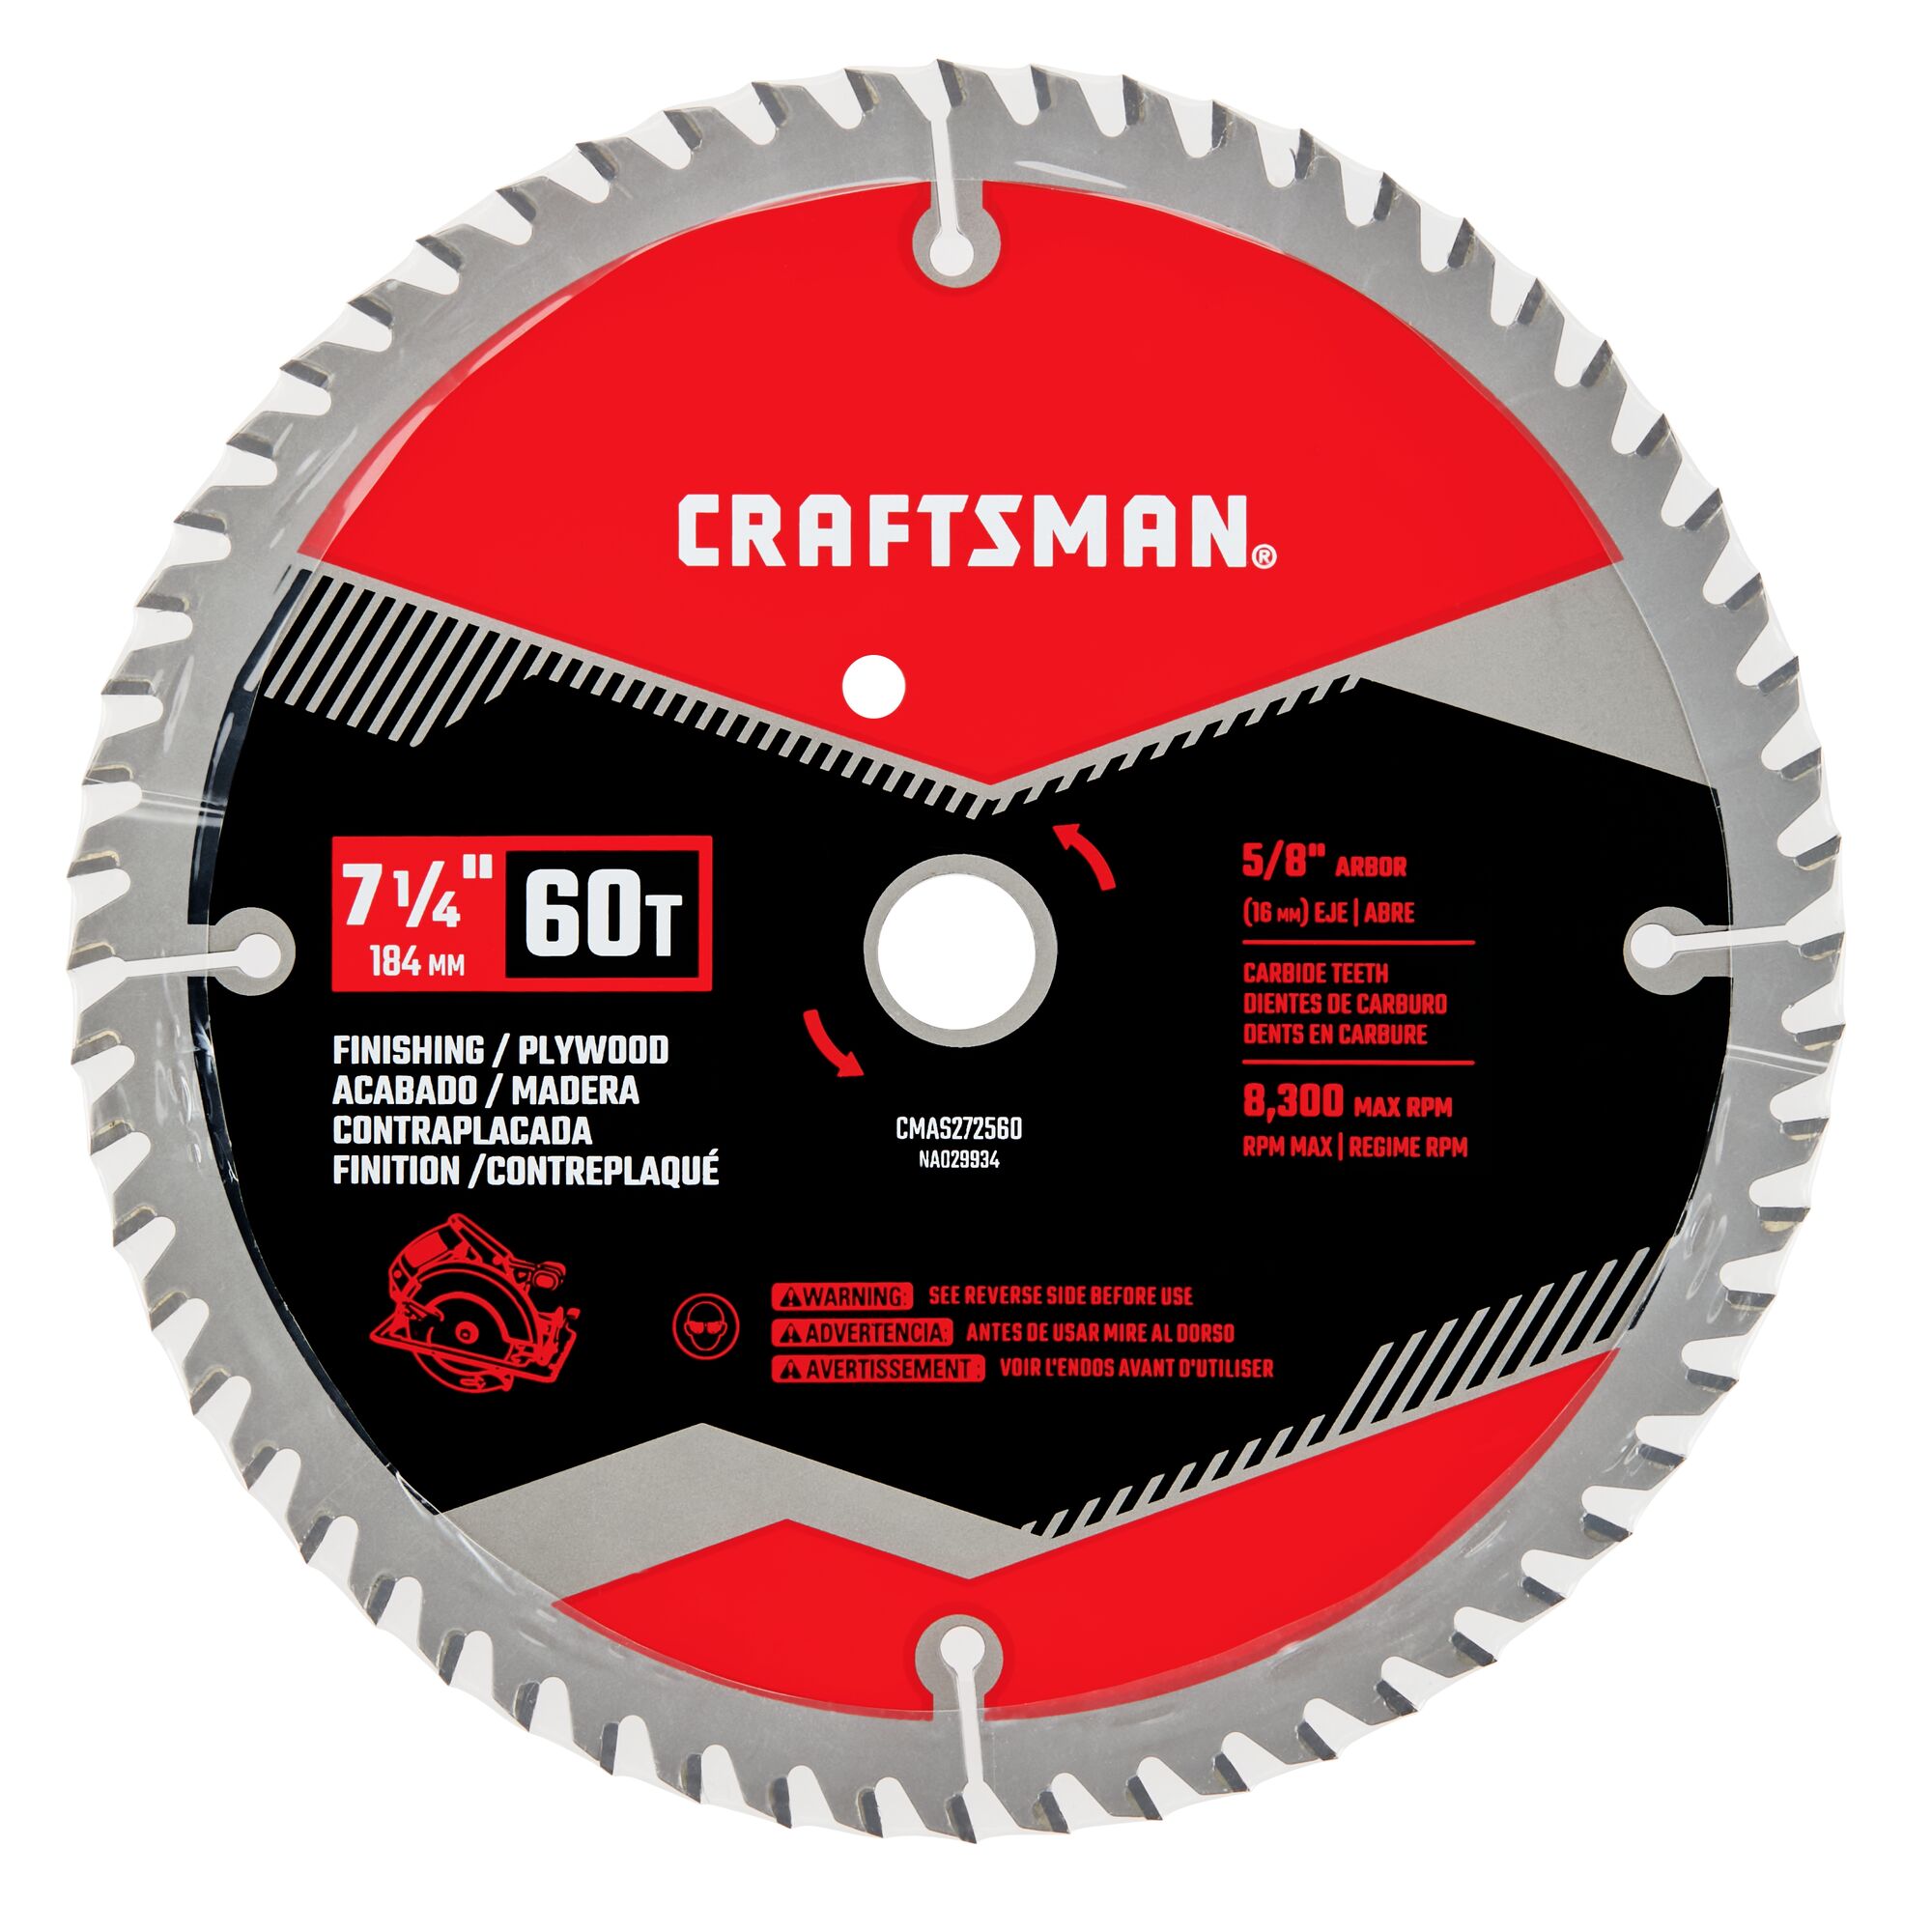 View of CRAFTSMAN Blades: Table Saw packaging